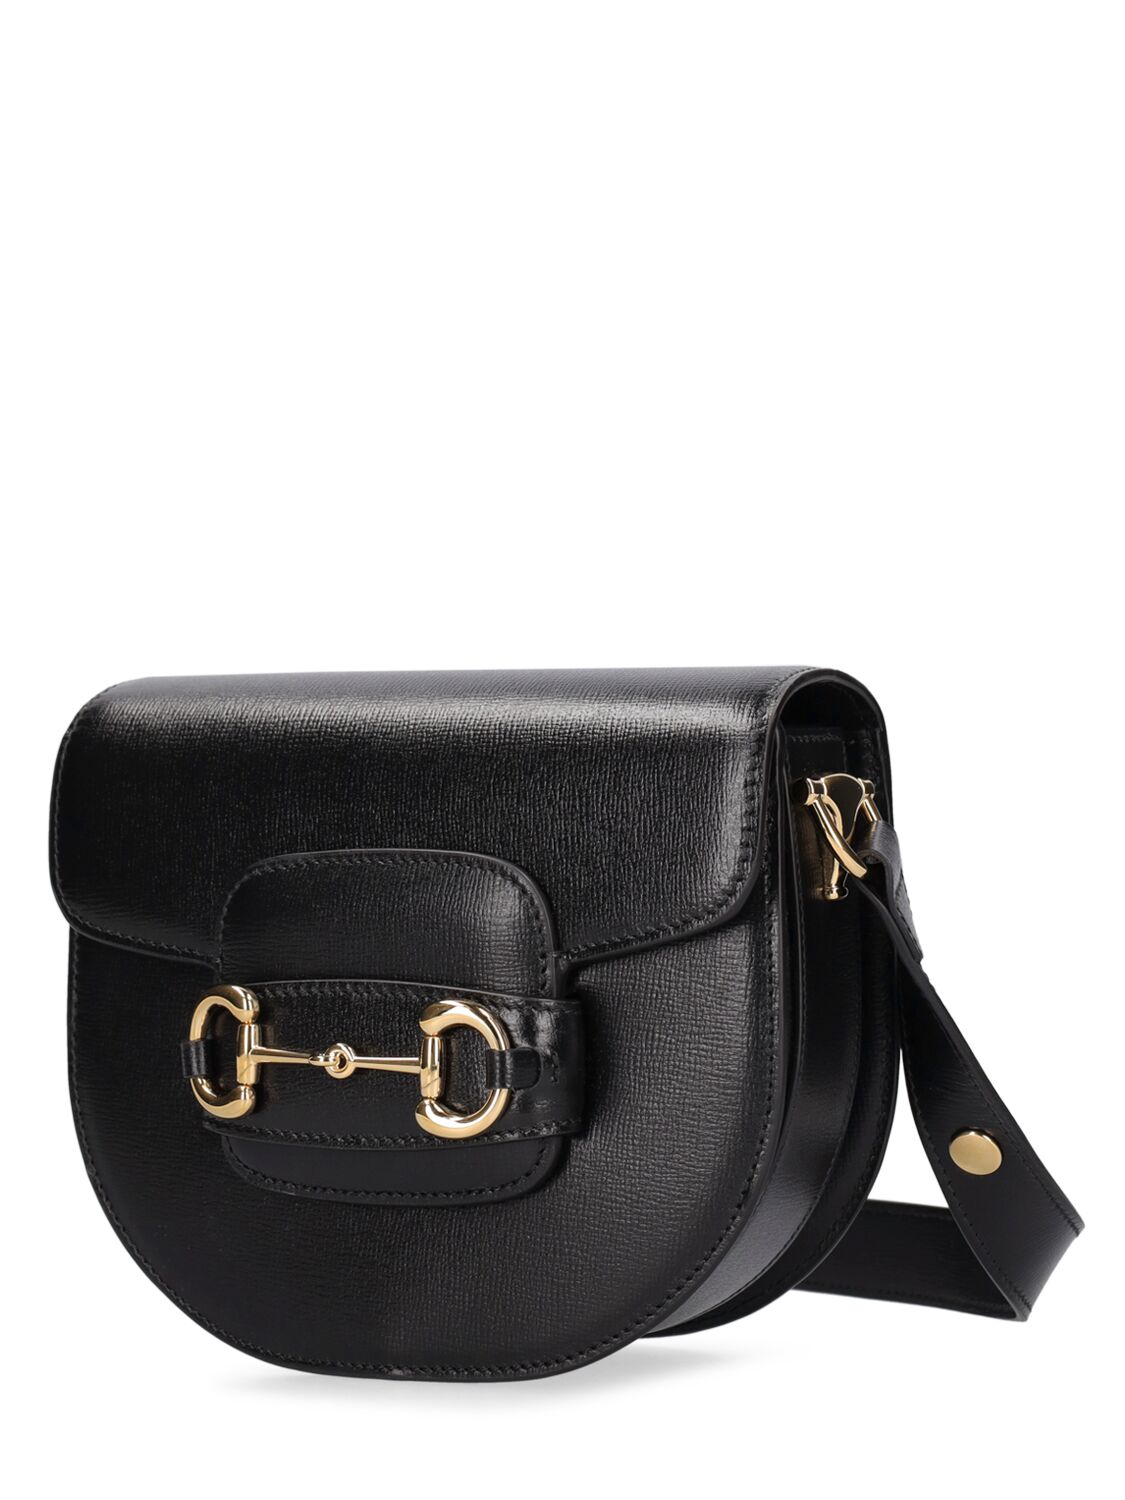 Gucci Horsebit 1955 mini rounded bag in black leather